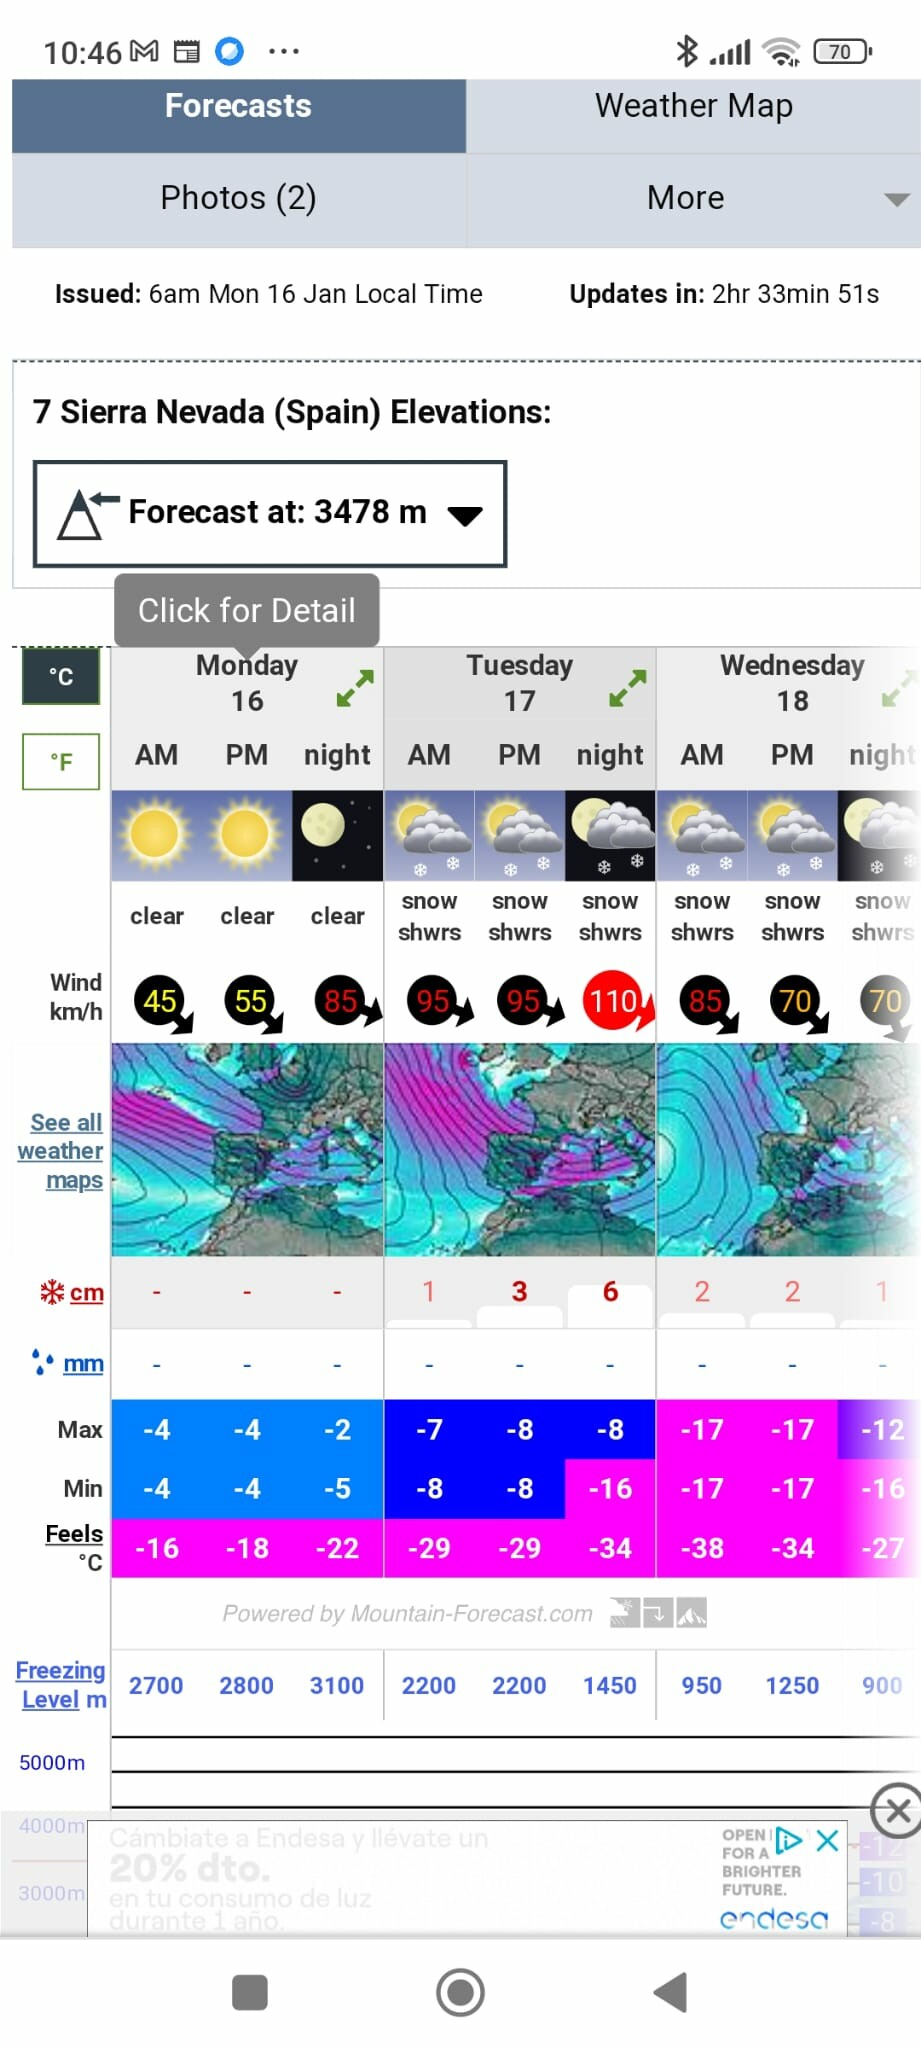 Weather forecast for Sierra Nevada Spain  mountains for next few days